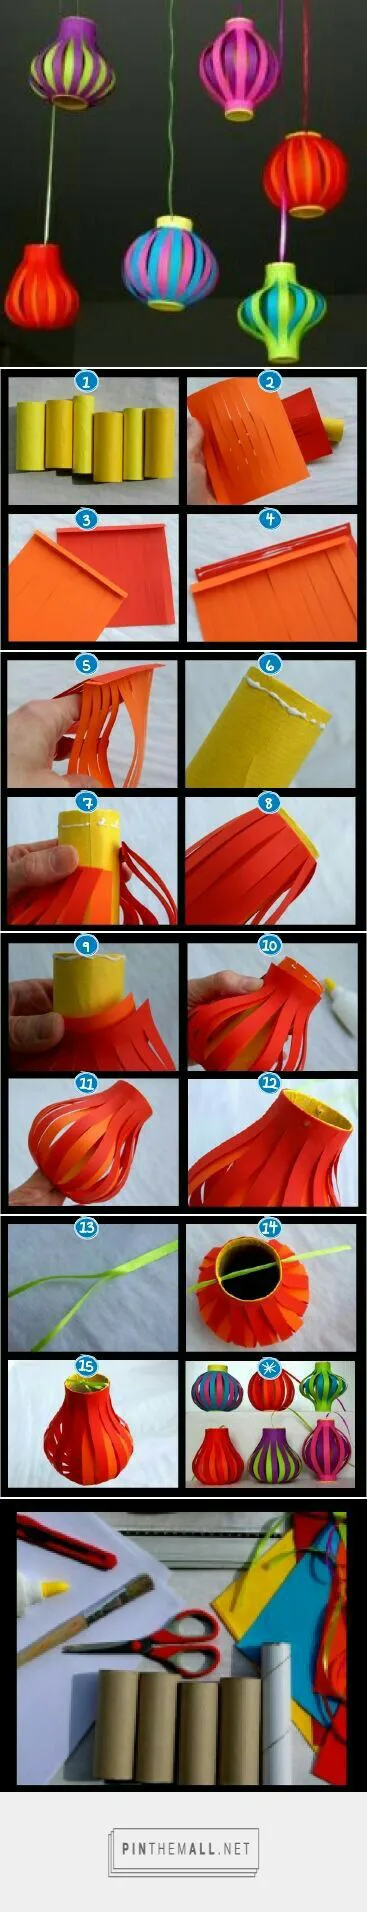 Clever use for toilet paper rolls and fun way to make lanterns: 